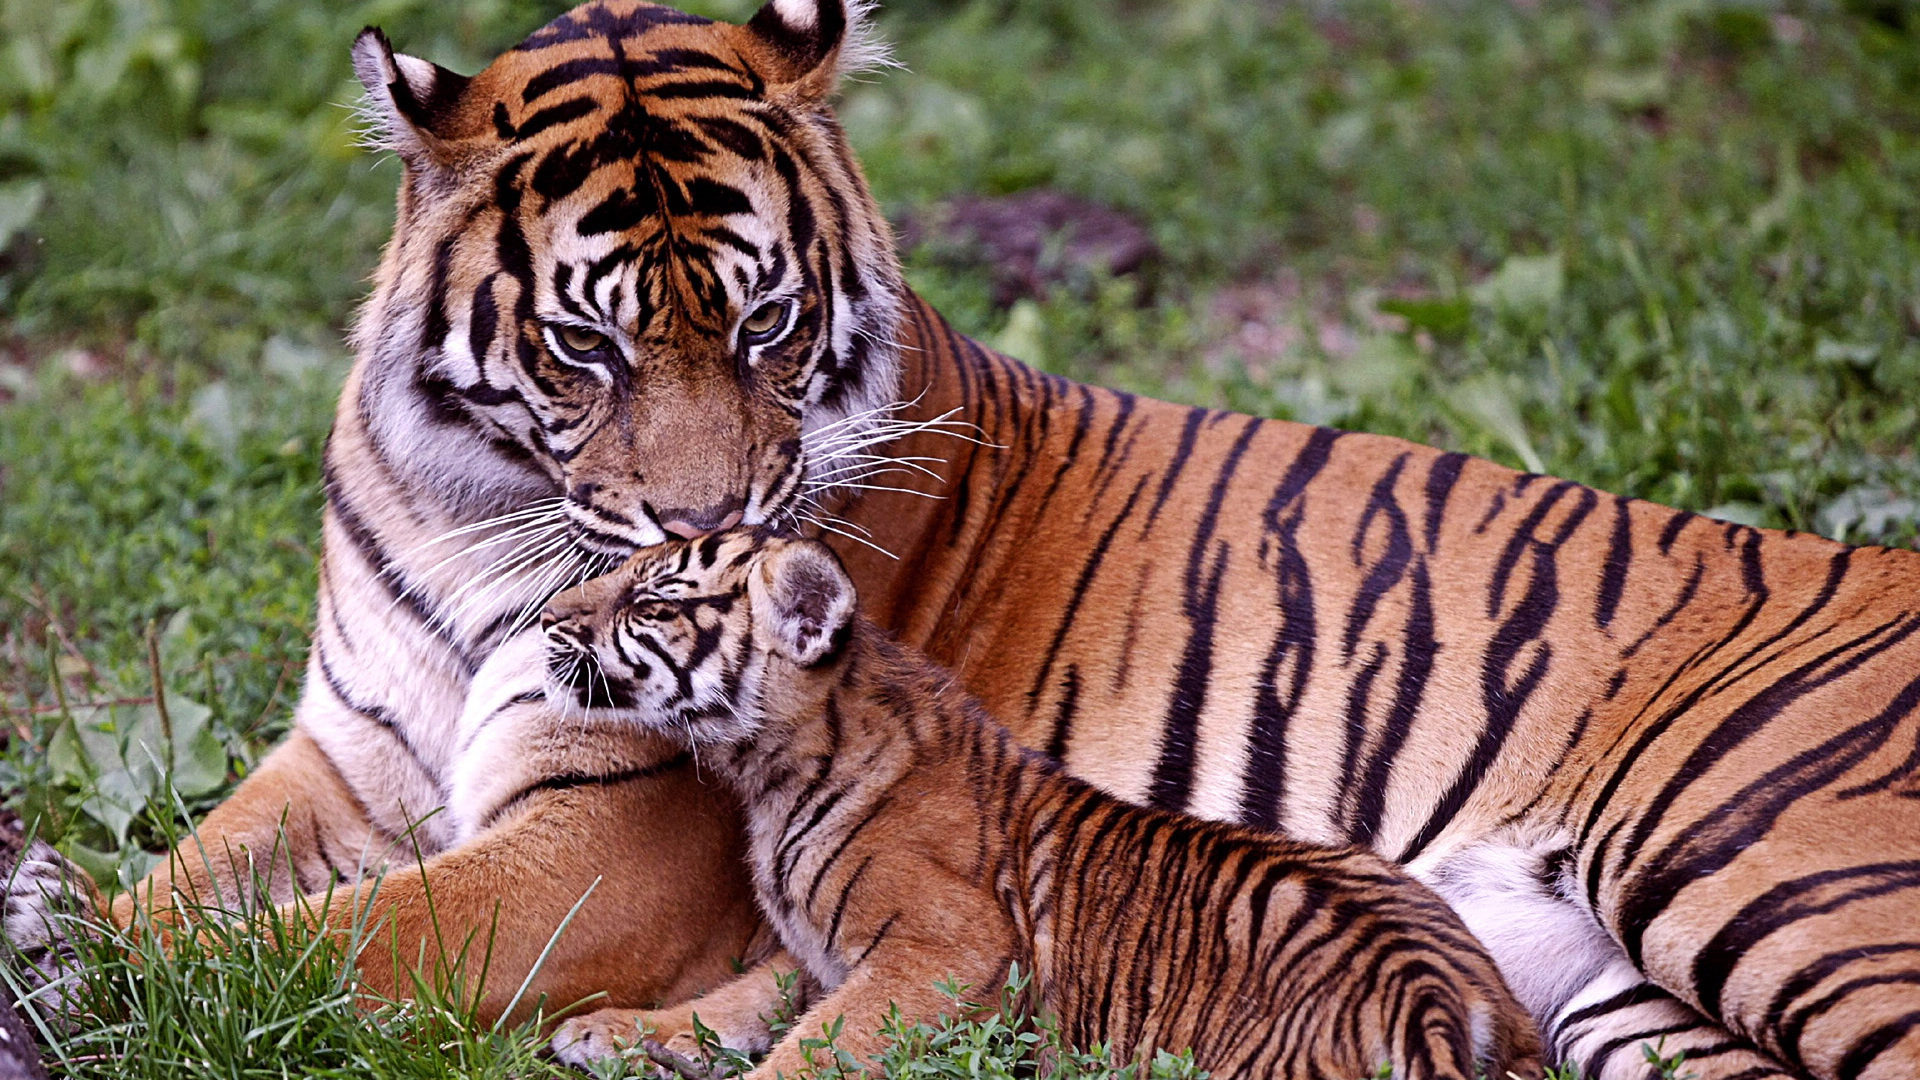 http://funpeep.com/wp-content/uploads/2015/03/Bengal-Tiger-and-baby.jpg